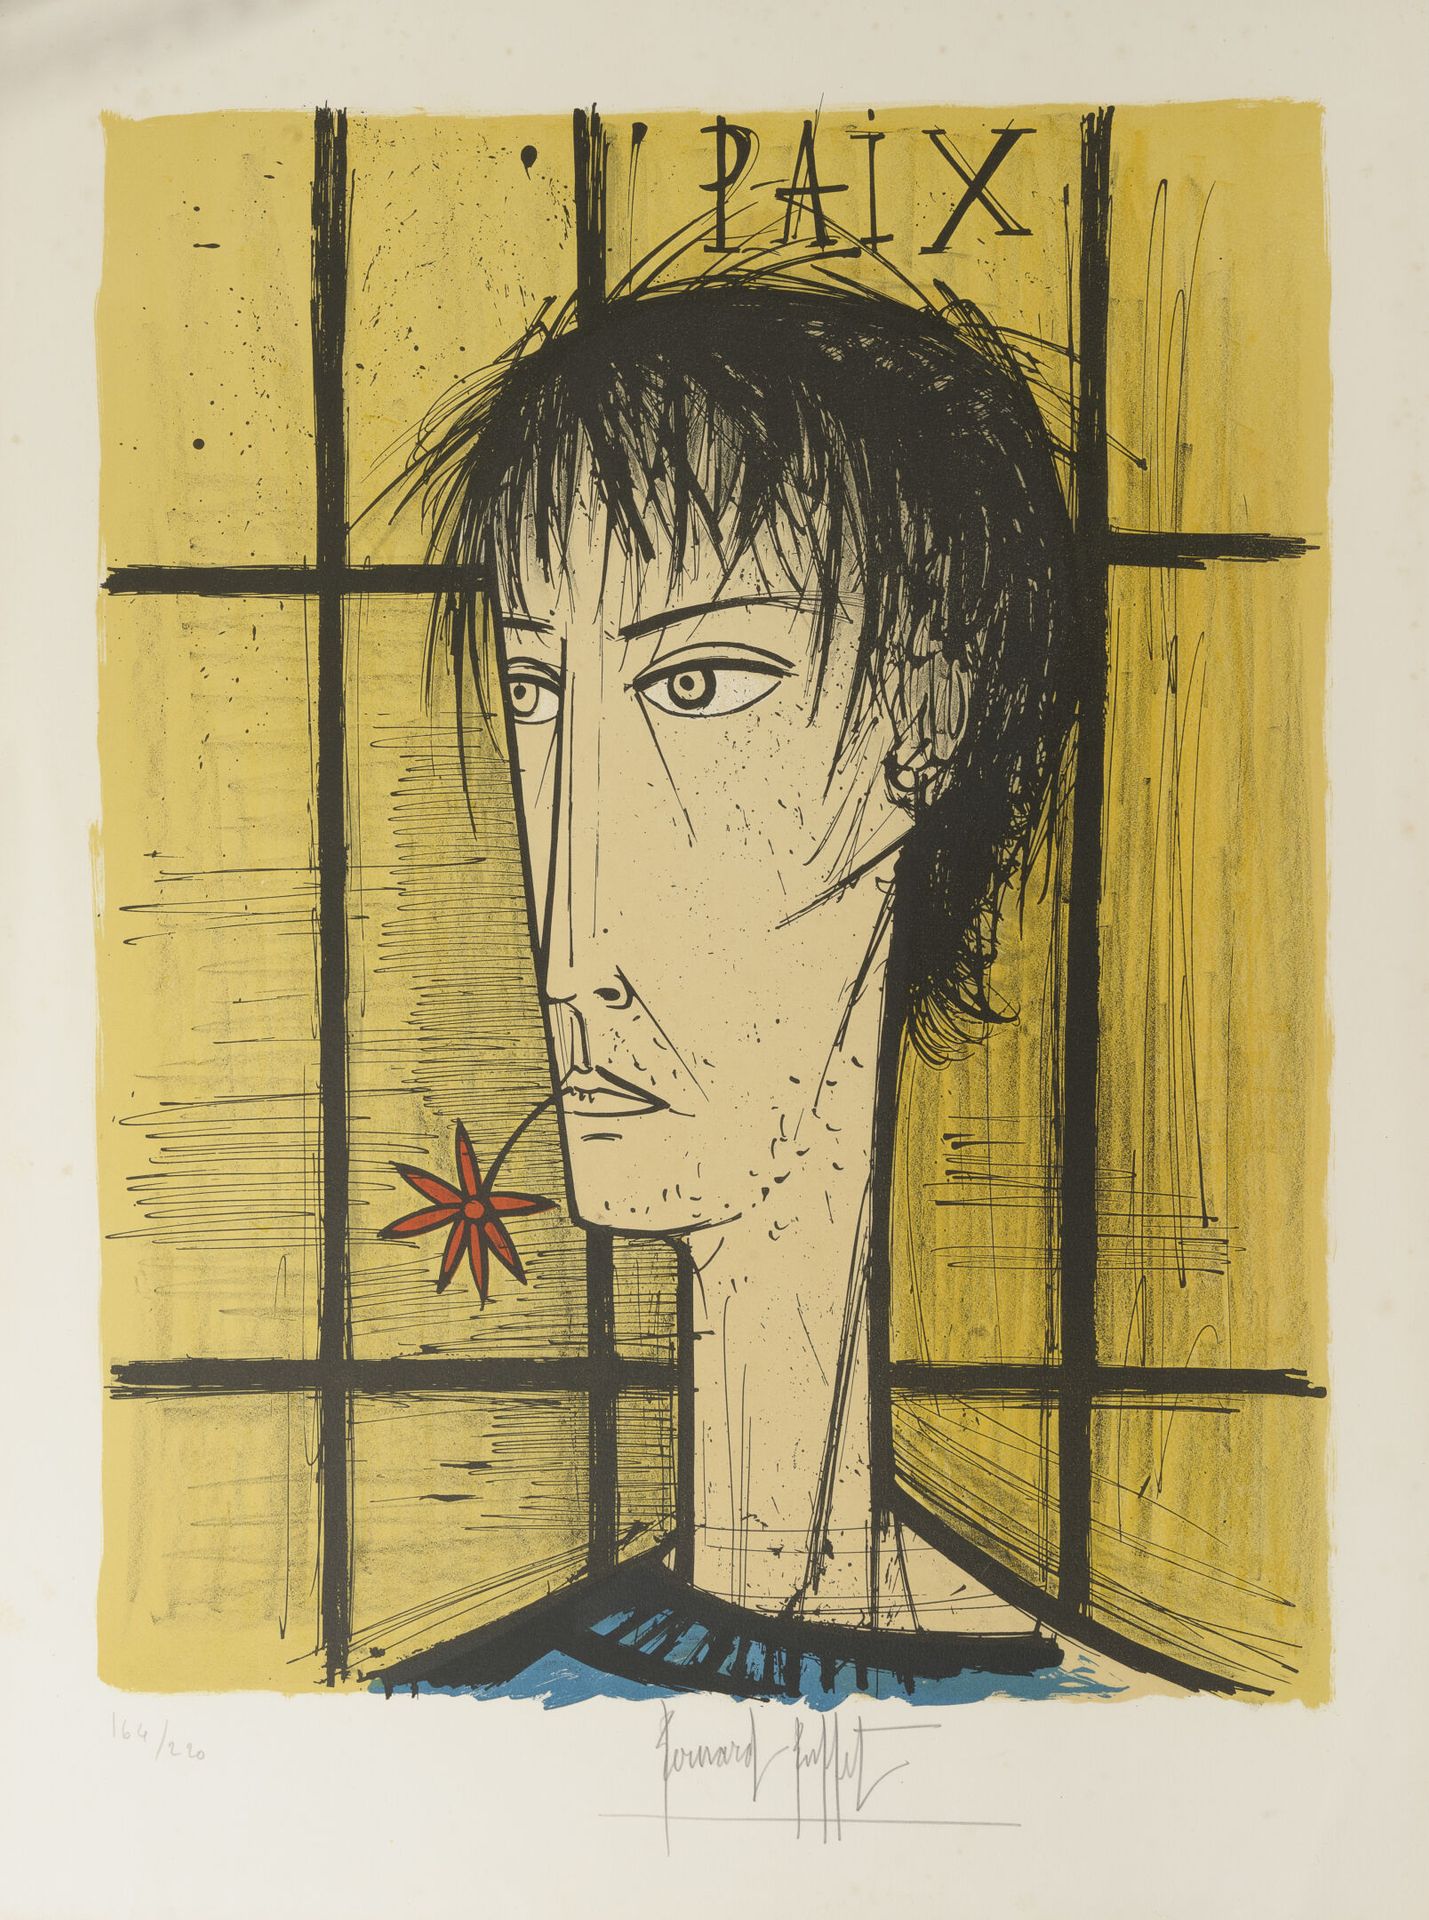 Bernard BUFFET (1928-1999) Peace, 1968.

Lithograph in colors on paper.

Signed &hellip;